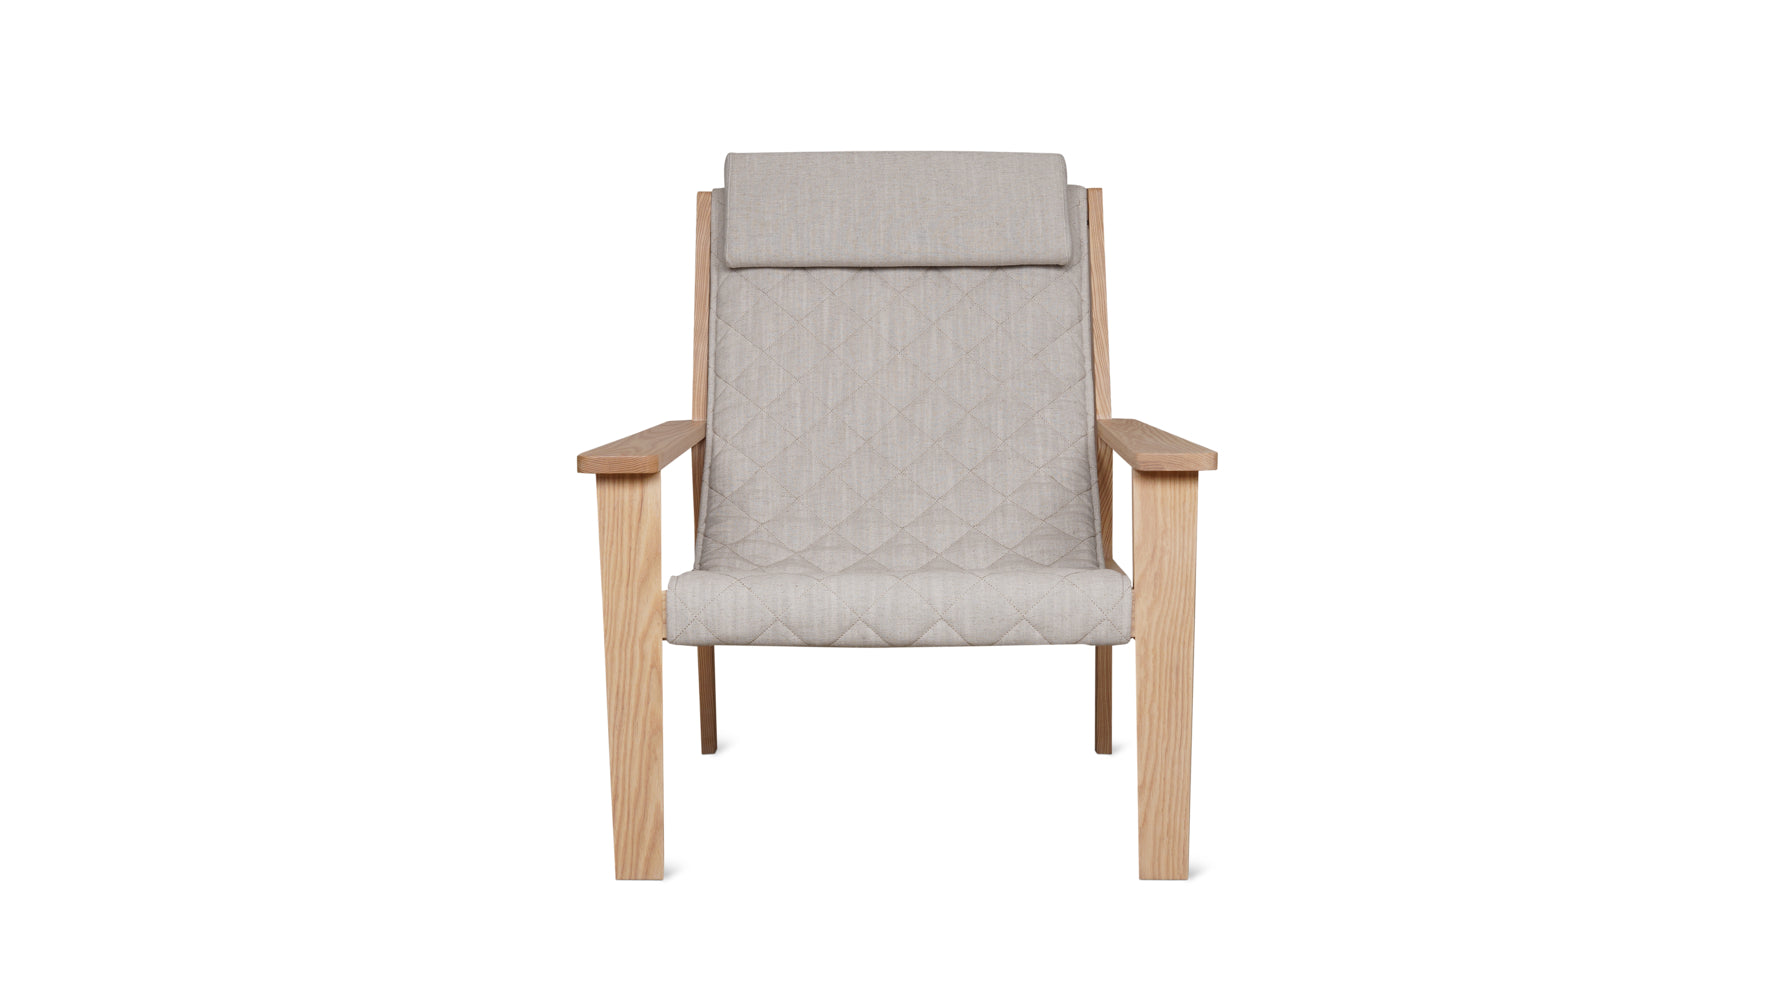 Sweet Life Sling Lounge Chair With Headrest, Natural Ash - Image 1